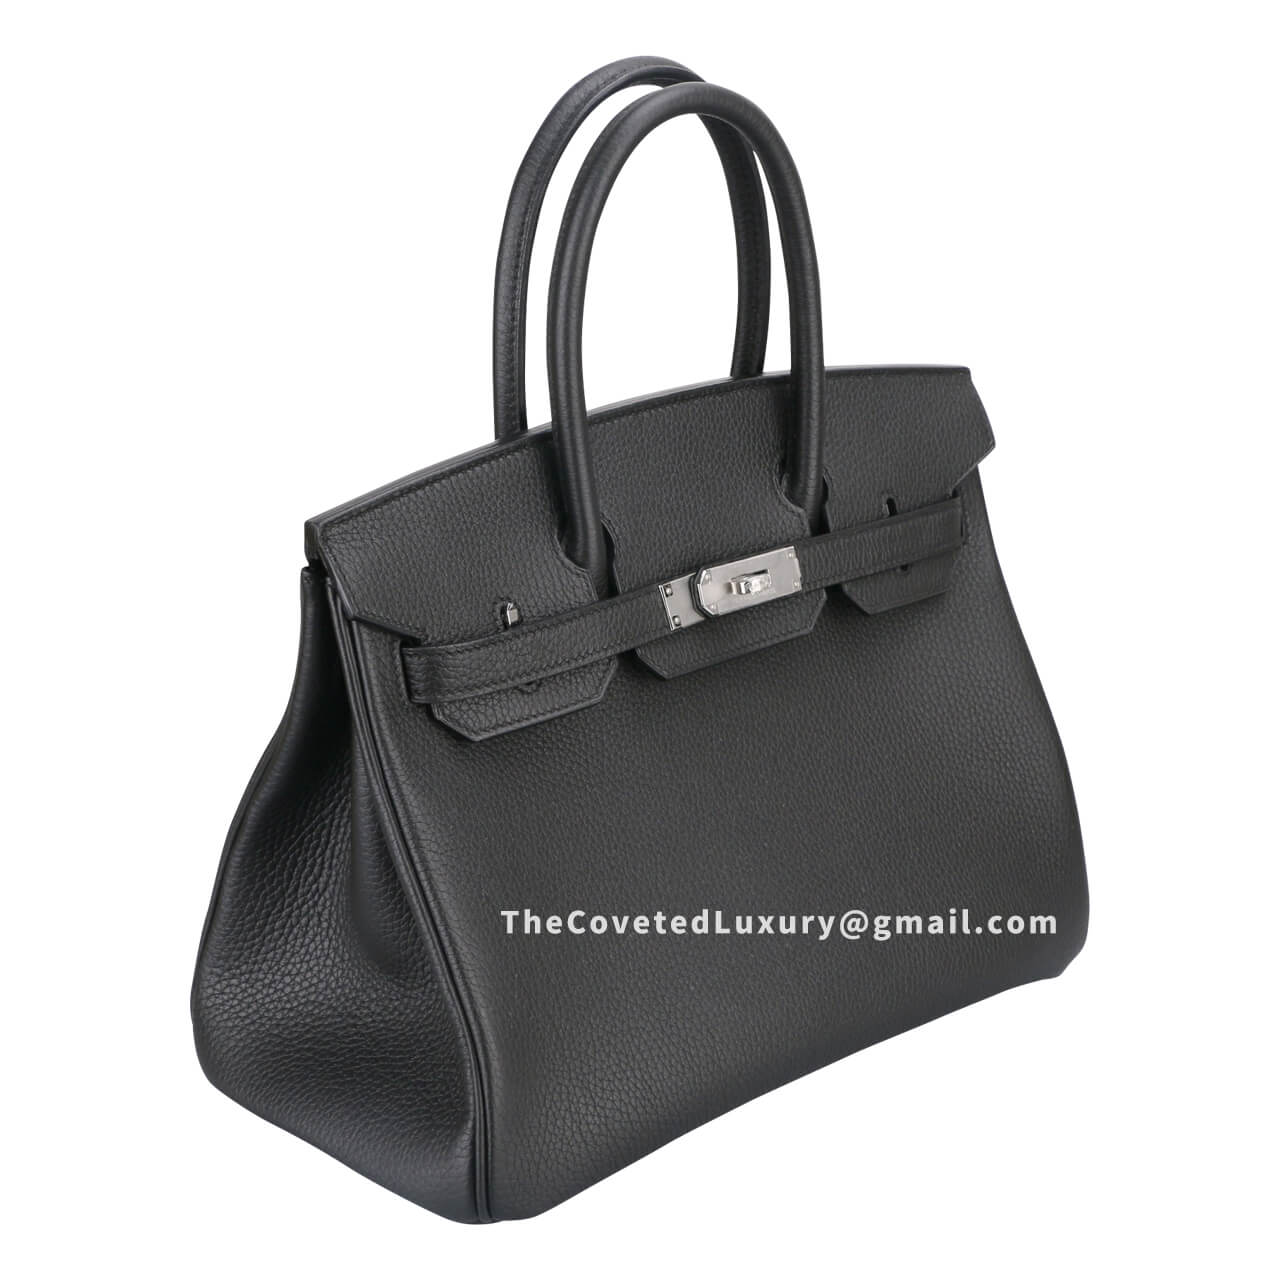 The Best Replica Hermes Double Sens bags Discount Price Is Waiting For You